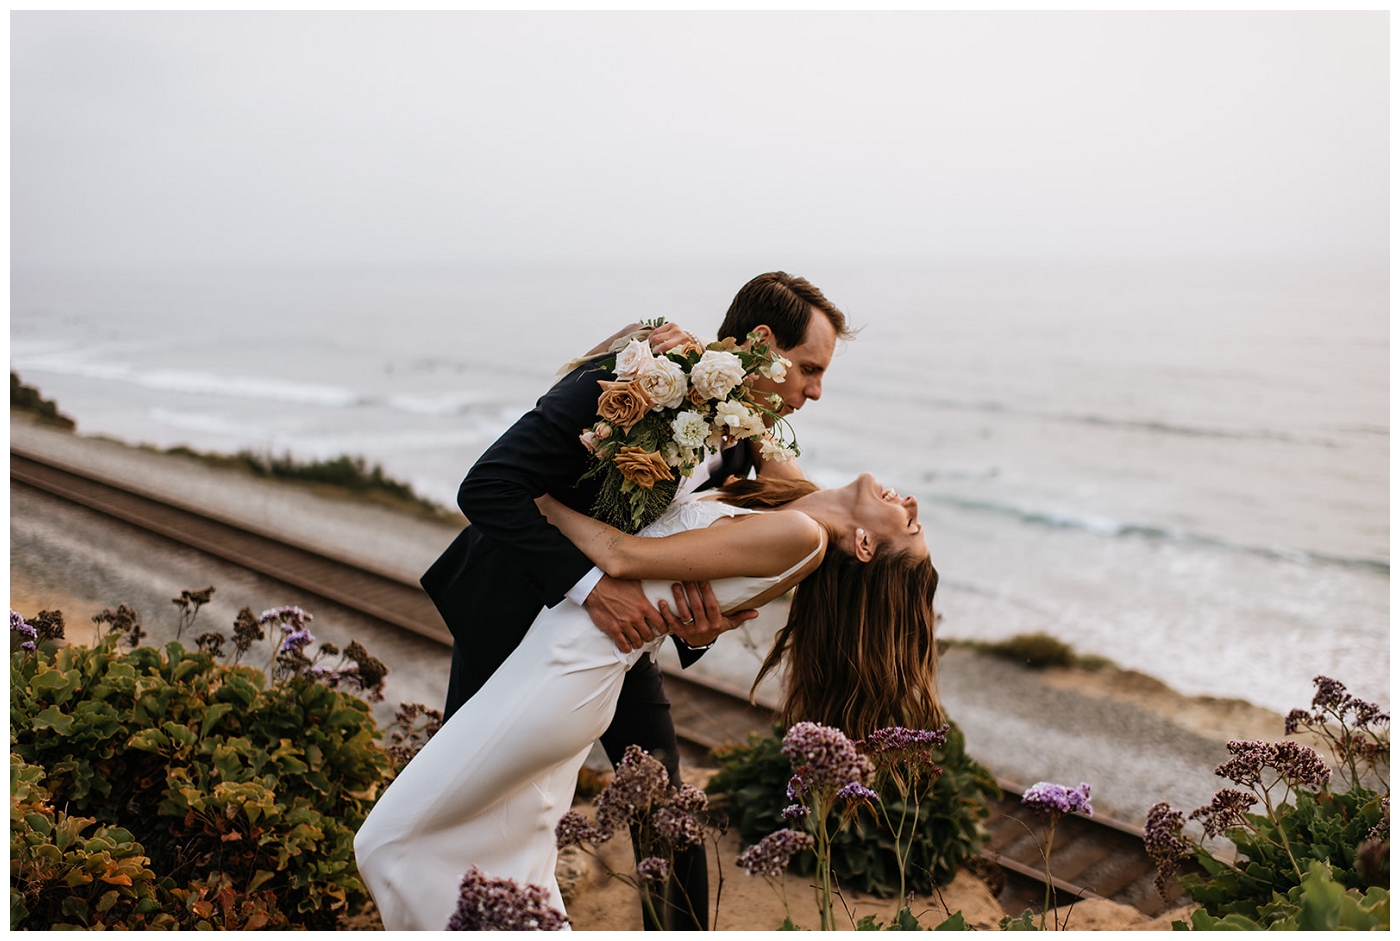 groom dipping his bride in front of beach view while she holds her bouquet, del mar surf station, farmhouse table, budvases ,outdoor reception, medium sized centerpieces, romantic weddings, daisies, toffee roses, berries, cream flowers, white flowers, hydrangeas, majolica roses, explosion grass, outdoor wedding, covid wedding, san diego wedding florist, southern california elopement florist, socal florist, best wedding florist san diego ca, best wedding florist southern california, los angeles wedding florist, top rated wedding florist in california, del mar san diego, blush tapered candles, blush table runner, budvases